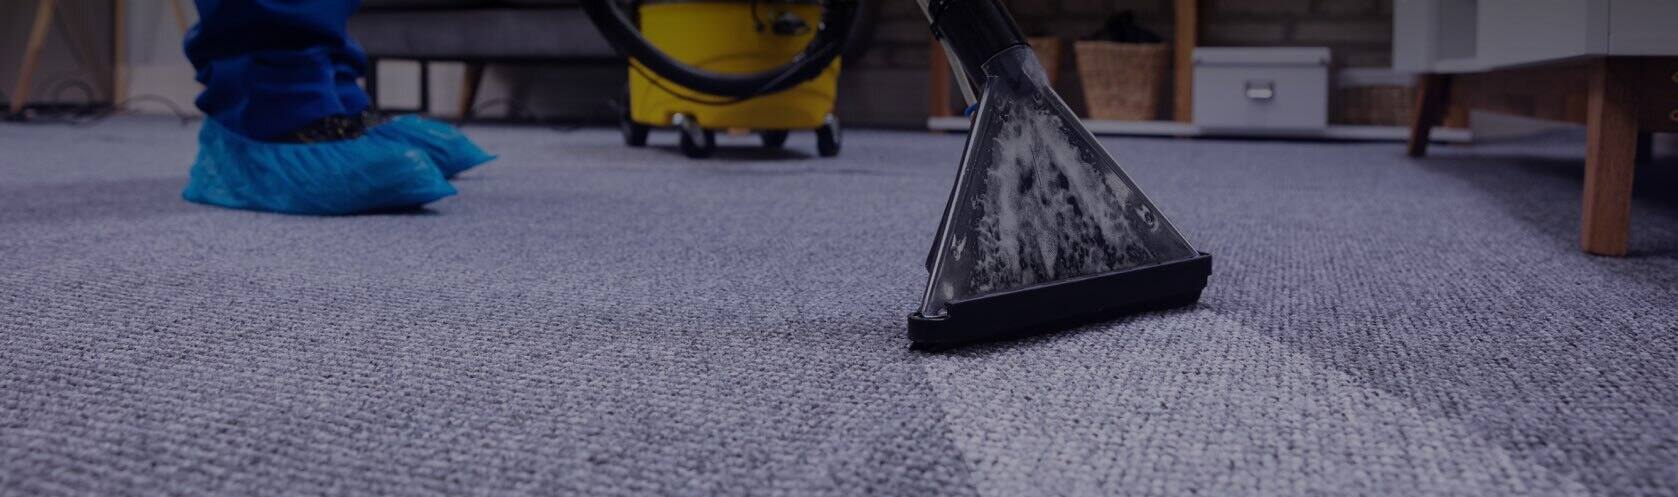 Top-rated carpet cleaners work.